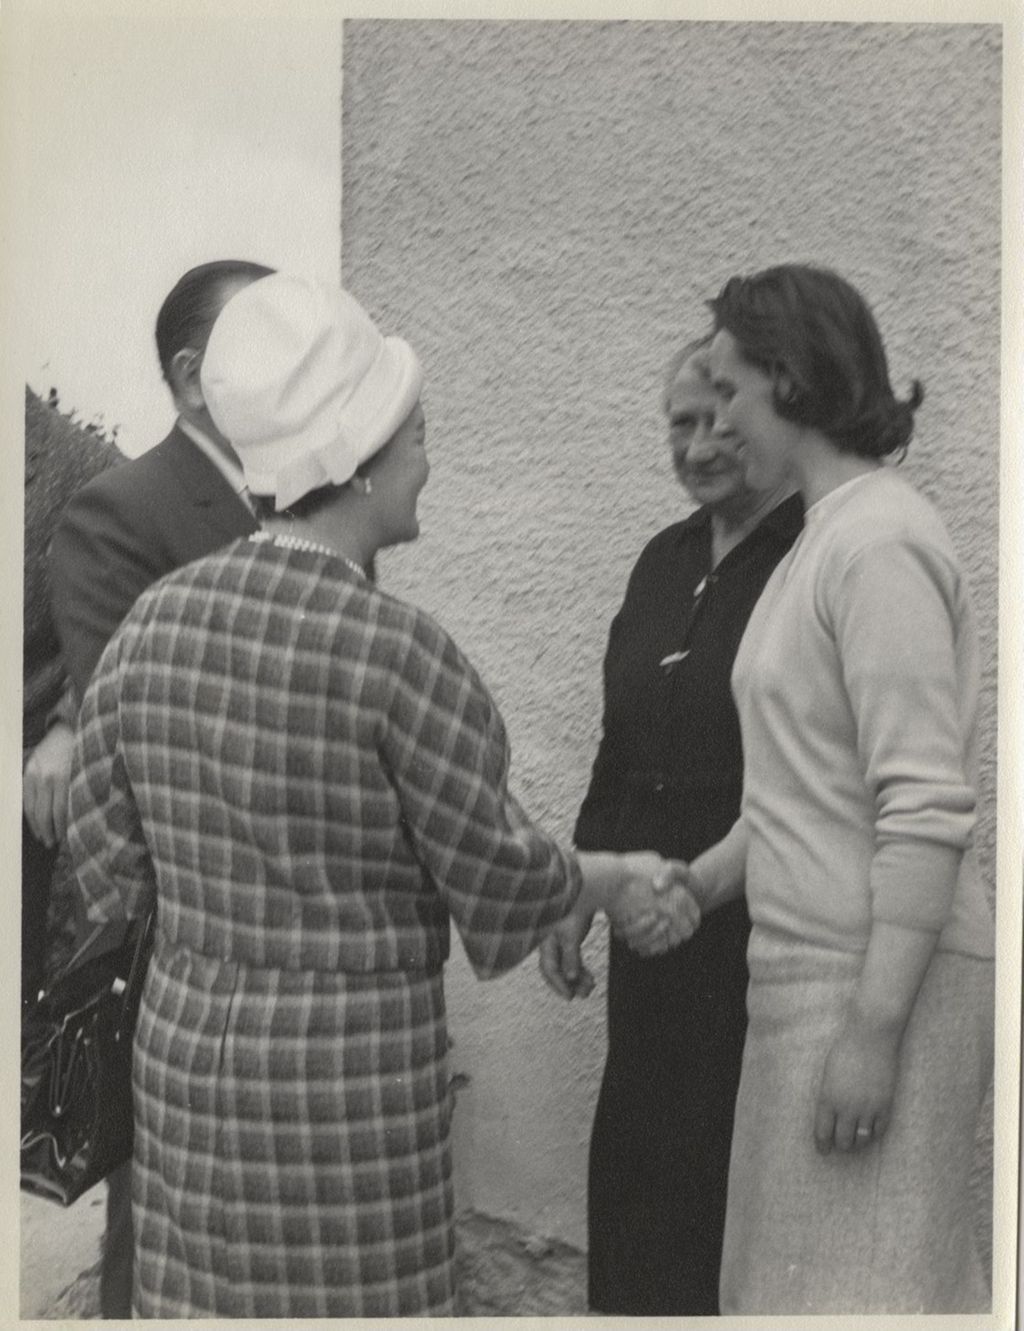 Trip to Ireland, Eleanor Daley greets relatives of John F. Kennedy